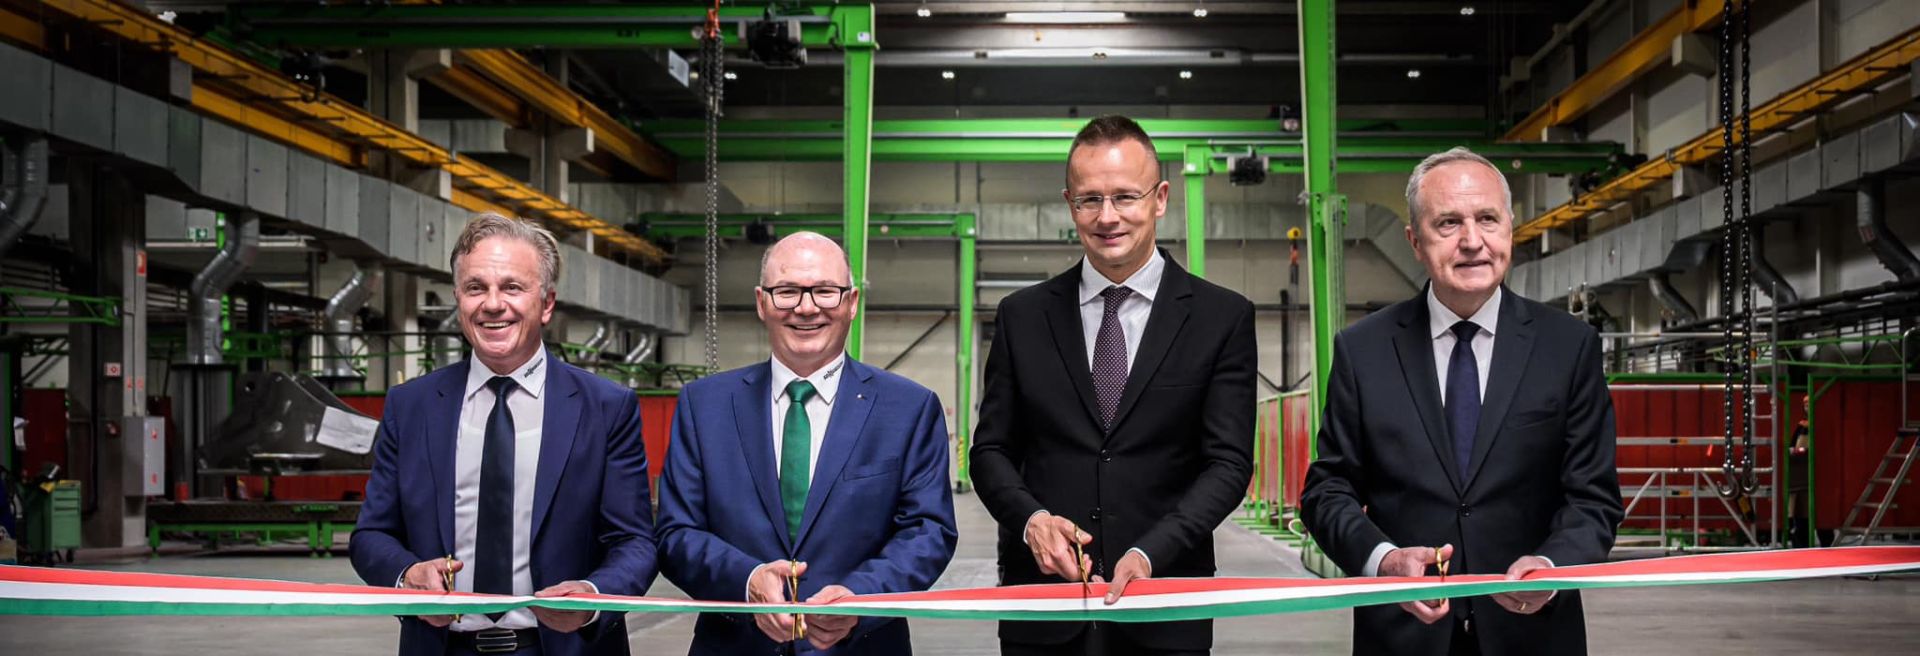 Leading Crane Technology Manufacturer Opens New Plant To Serve Growing Demand